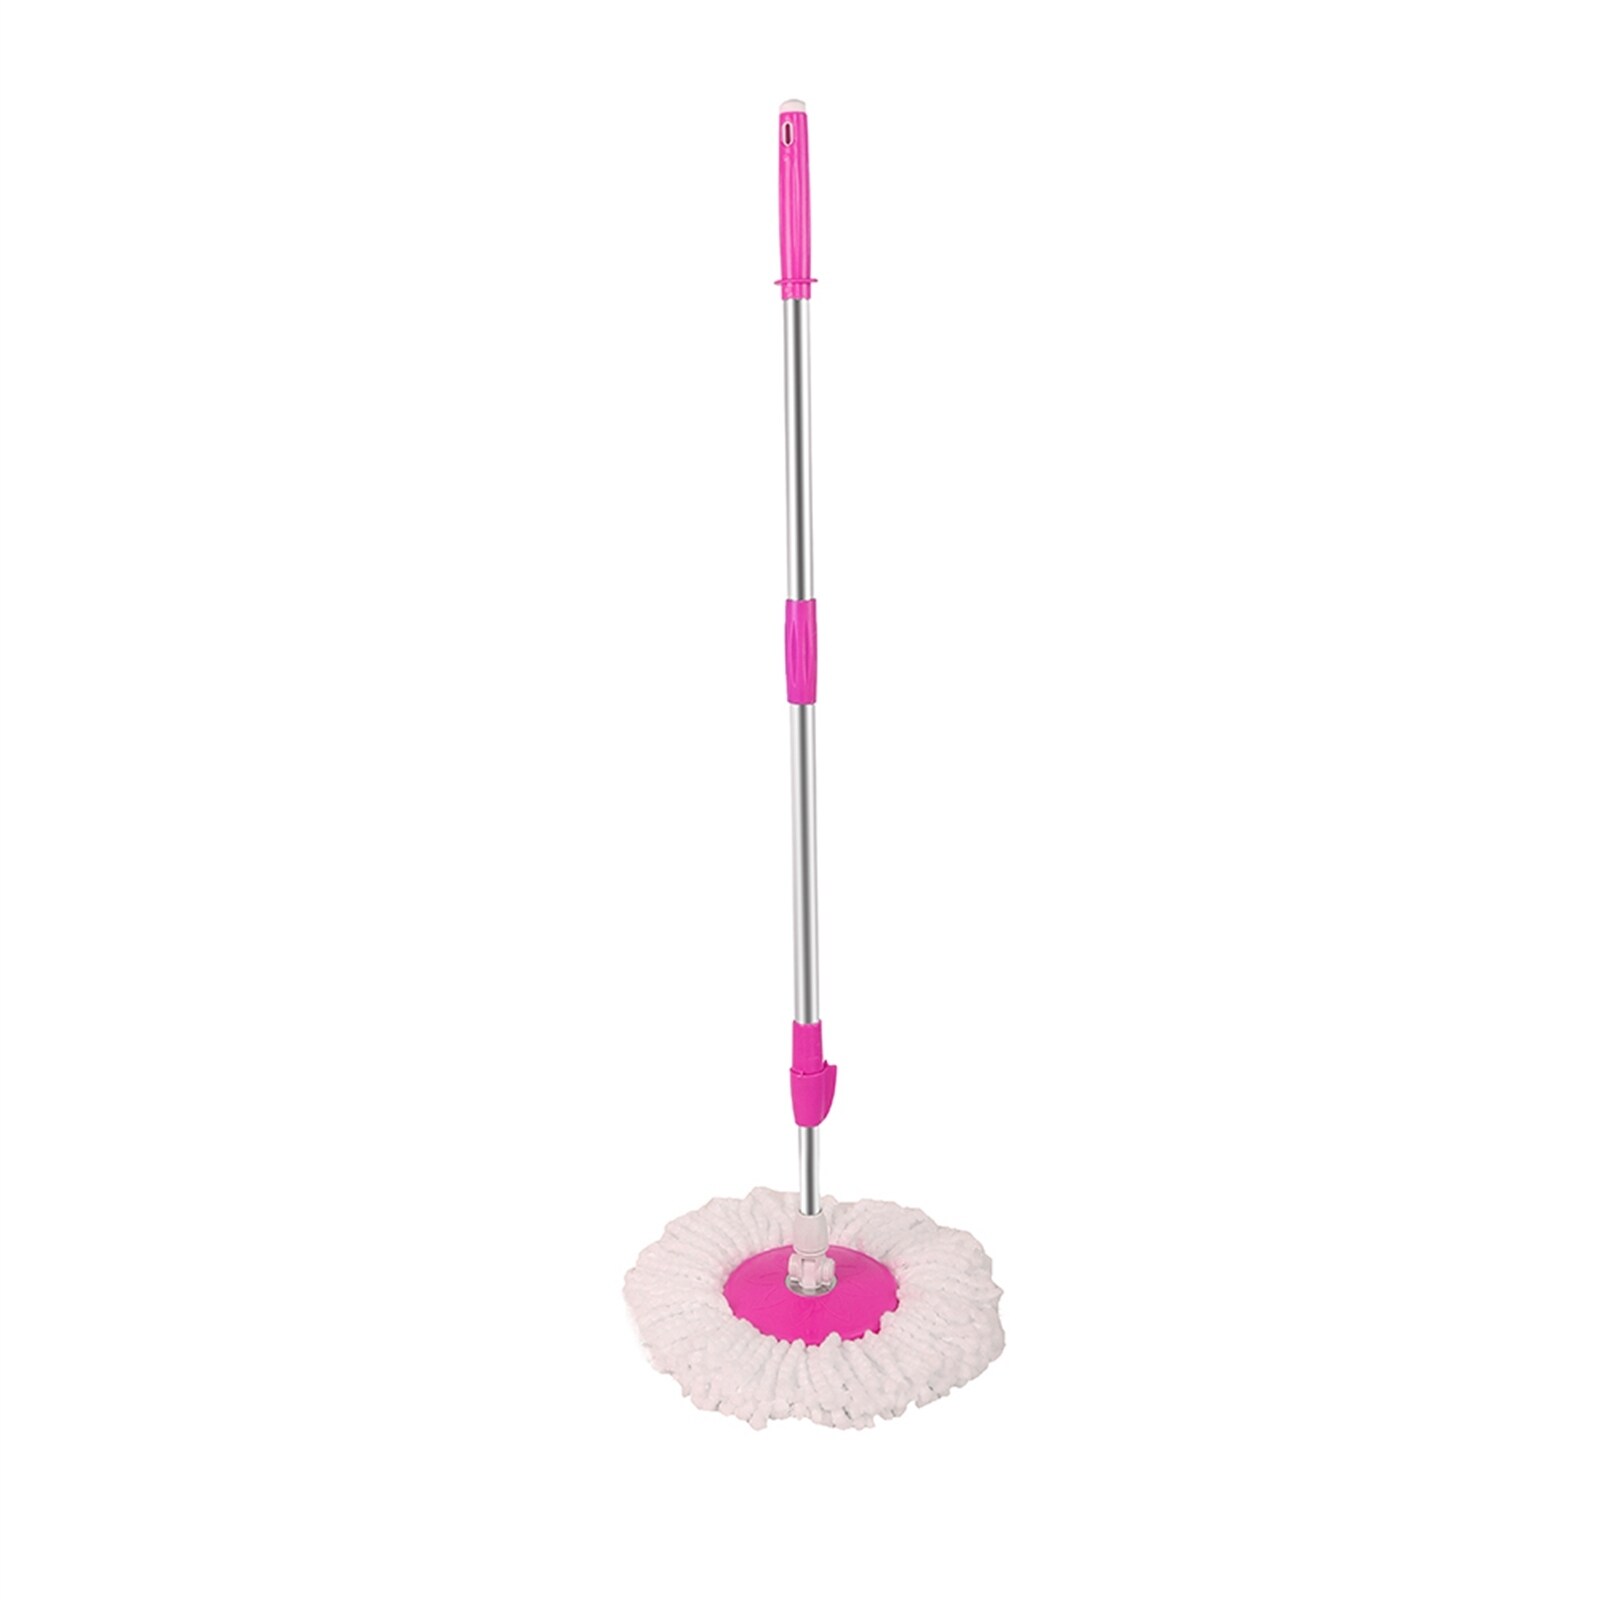 https://ak1.ostkcdn.com/images/products/is/images/direct/ca2d5bcee433adad12e8419a5ea3781b3723b0c1/360%C2%B0-Spin-Mop-with-Bucket-%26-Dual-Mop-Heads.jpg